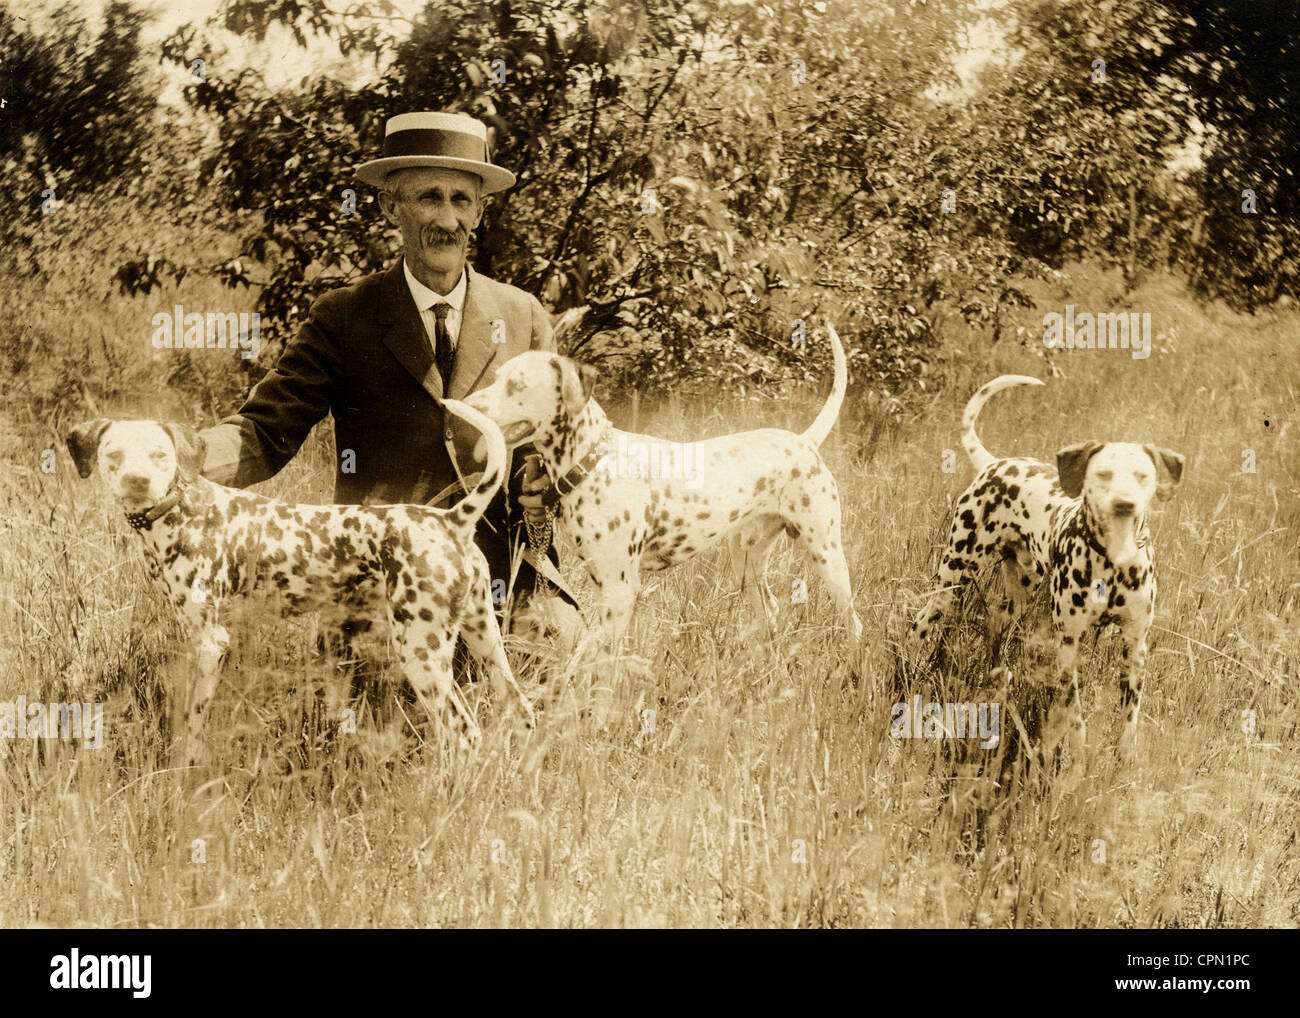 Old Man in a Field with Three Dalmatians Stock Photo